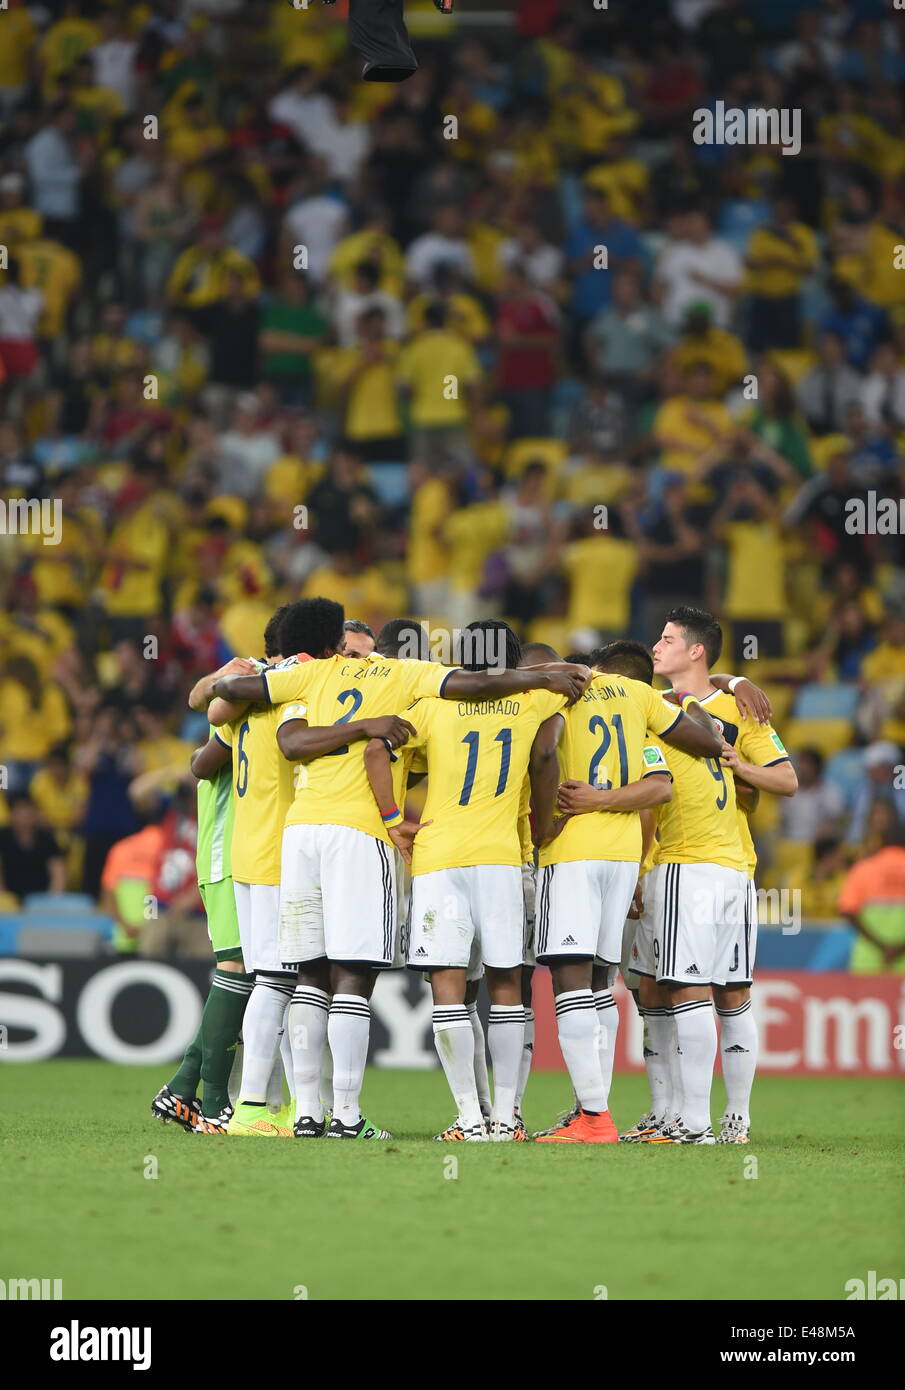 Rio De Janeiro, Brazil. 28th June, 2014. Colombia team group (COL) Football/Soccer : Colombia players including James Rodriguez (R) make a circle before the second half during the FIFA World Cup Brazil 2014 Round of 16 match between Colombia 2-0 Uruguay at Estadio do Maracana in Rio De Janeiro, Brazil . © SONG Seak-In/AFLO/Alamy Live News Stock Photo